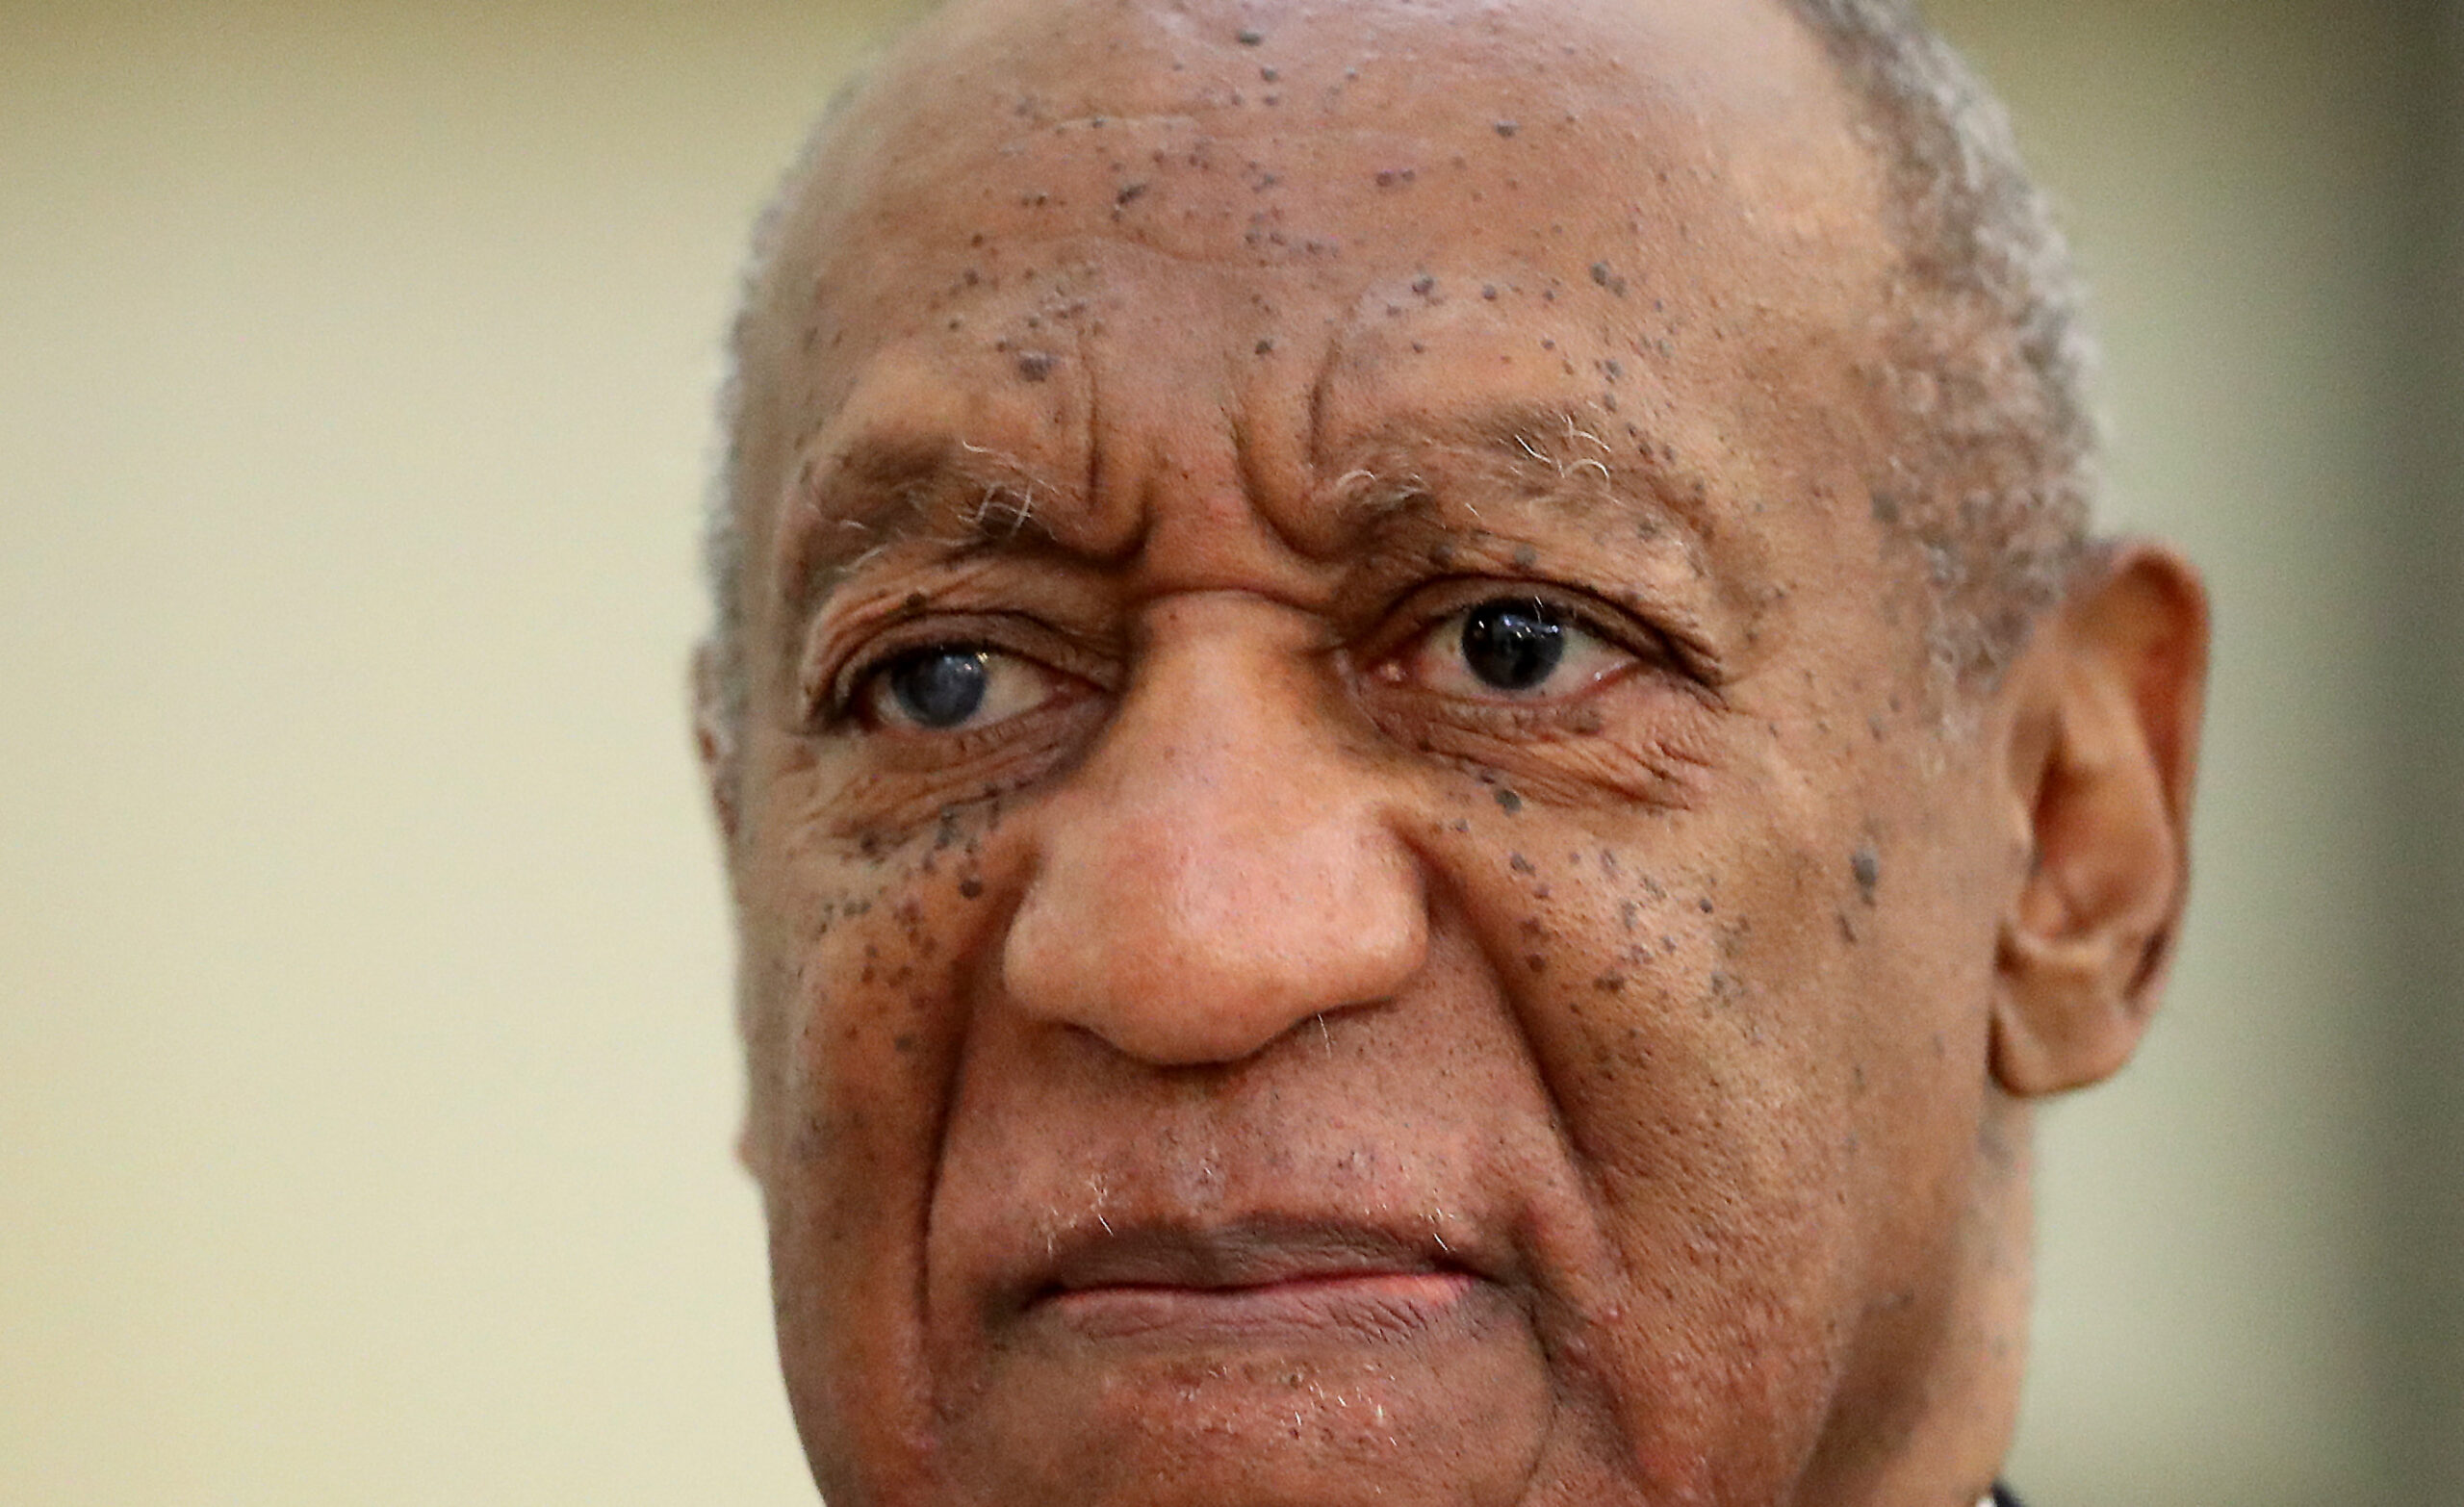 Bill Cosby's Attorneys Reportedly Asking for a Retrial In Playboy Mansion Sexual Abuse Civil Case That Granted Alleged Victim $500,000 in Damages